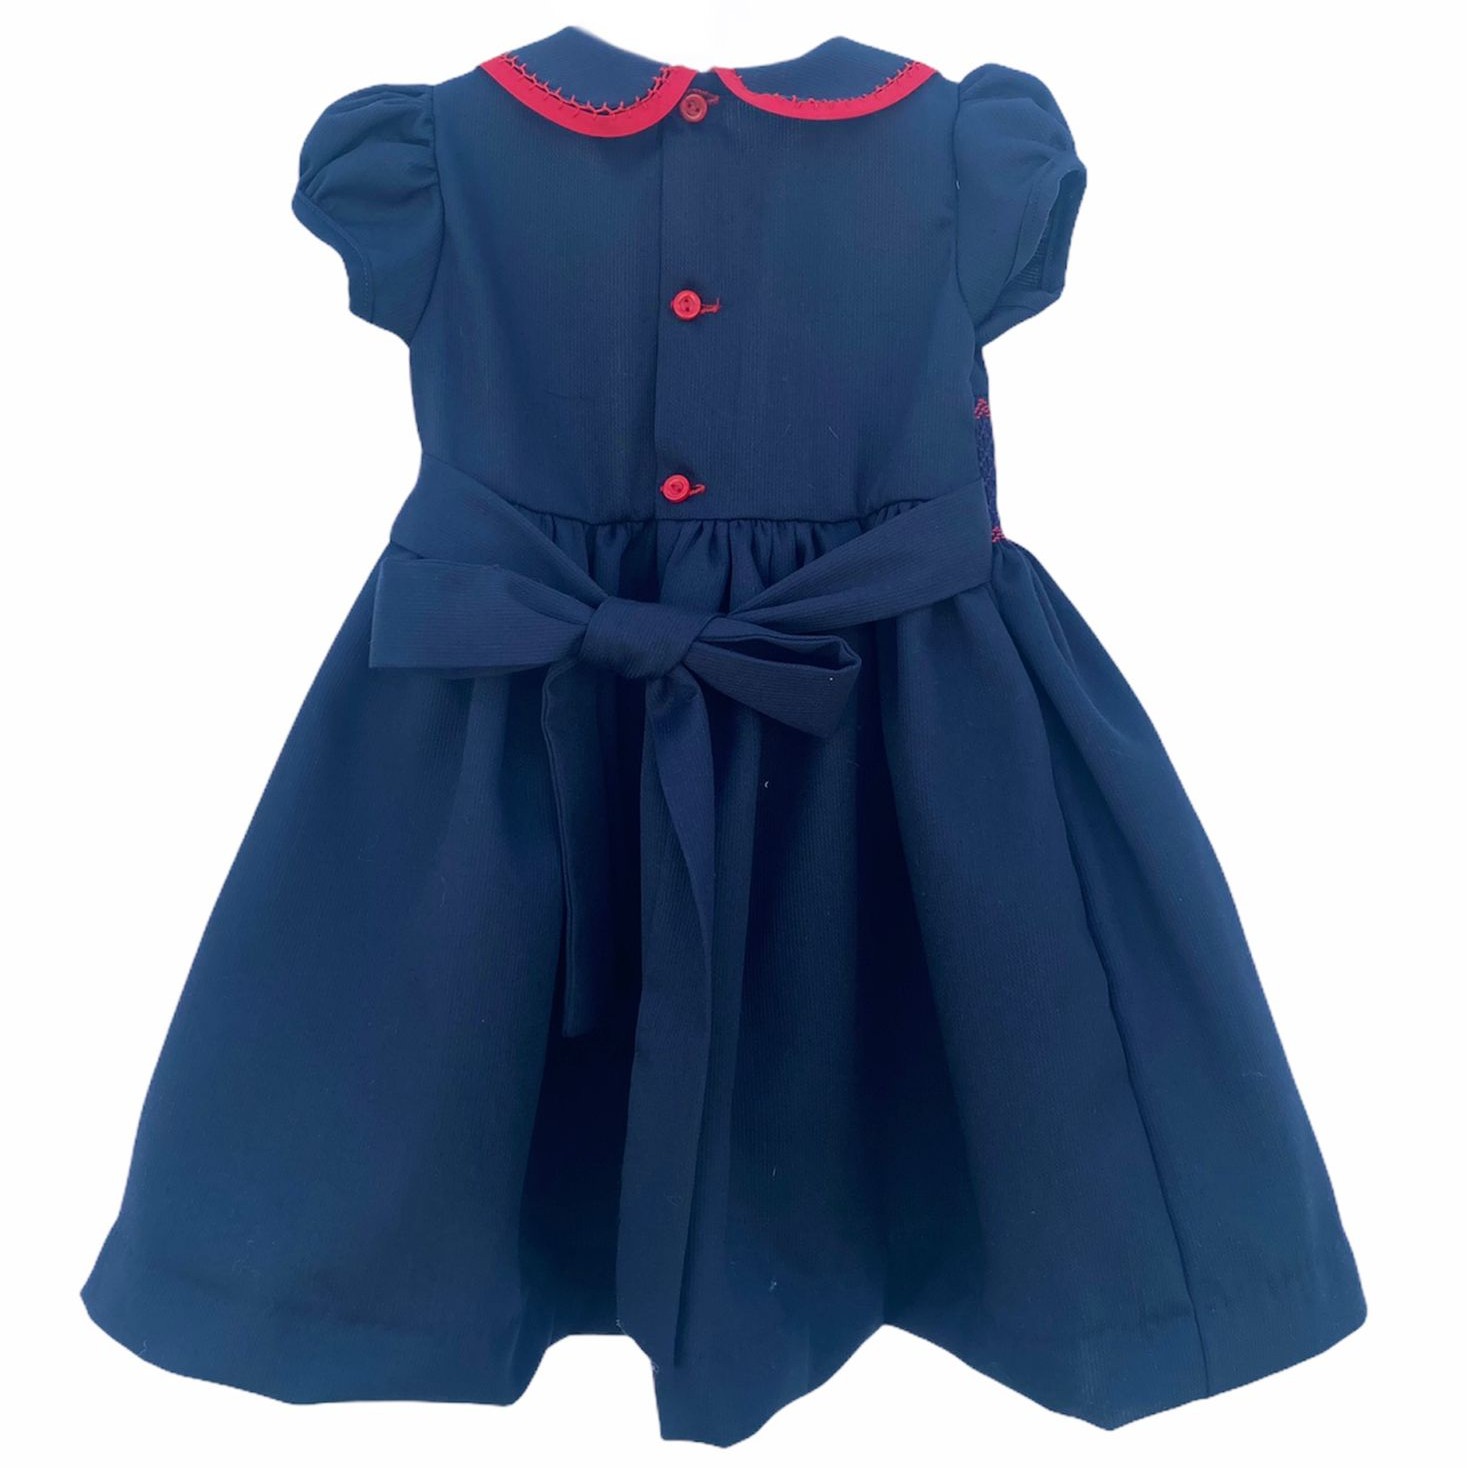 Girl's Dress with Hand Embroidery - Blue Color with Buttons and Red Collar.